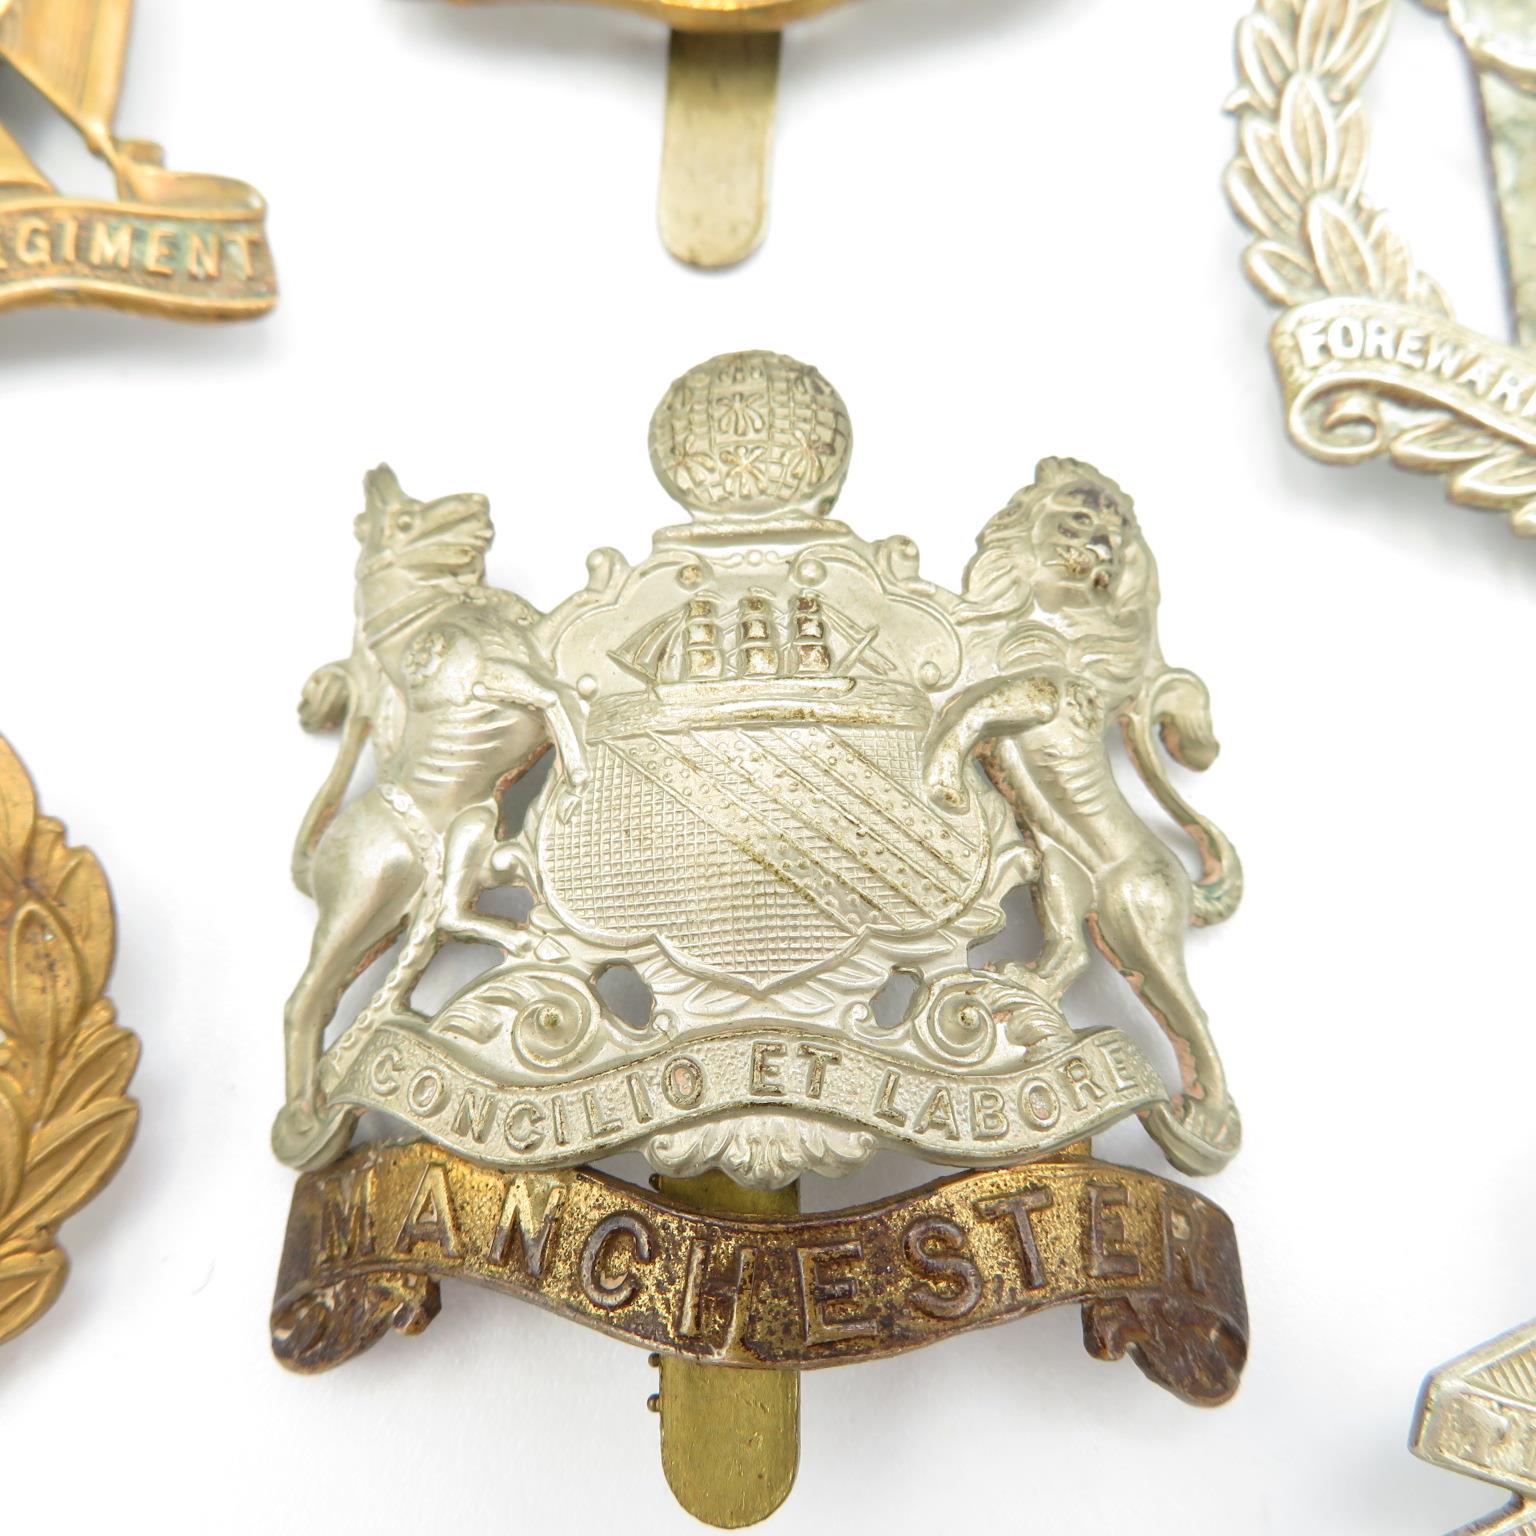 15x Military cap badges including Royal Scots Army Air Corps etc. - - Image 12 of 16